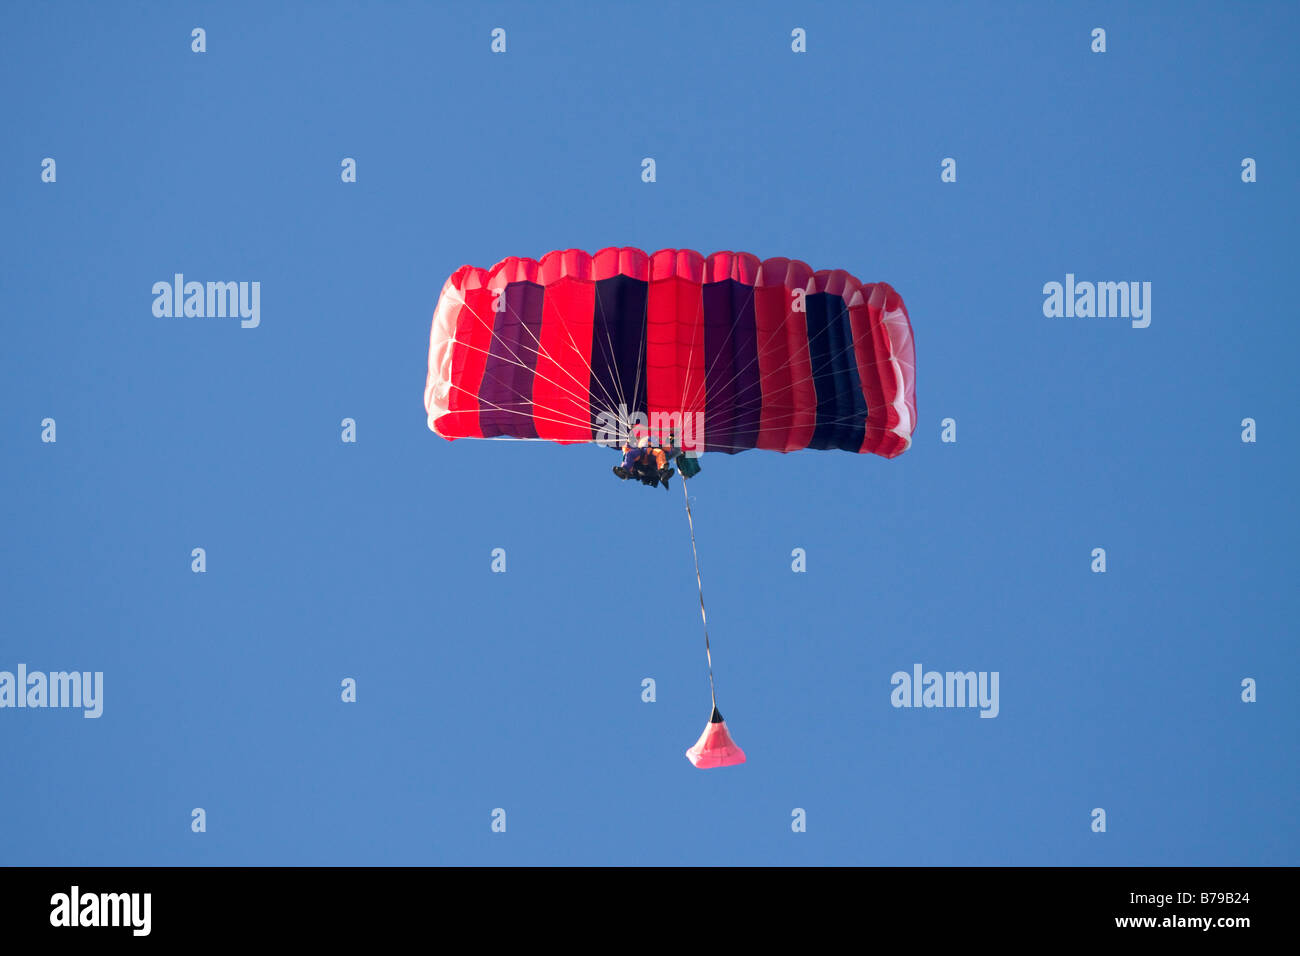 TANDEM SKYDIVE. TANDEM PARACHUTING IN ENGLAND, A RED AND BLUE STRIPED PARACHUTE CARRYING TWO PEOPLE GLIDES ACROSS THE BLUE SKY Stock Photo